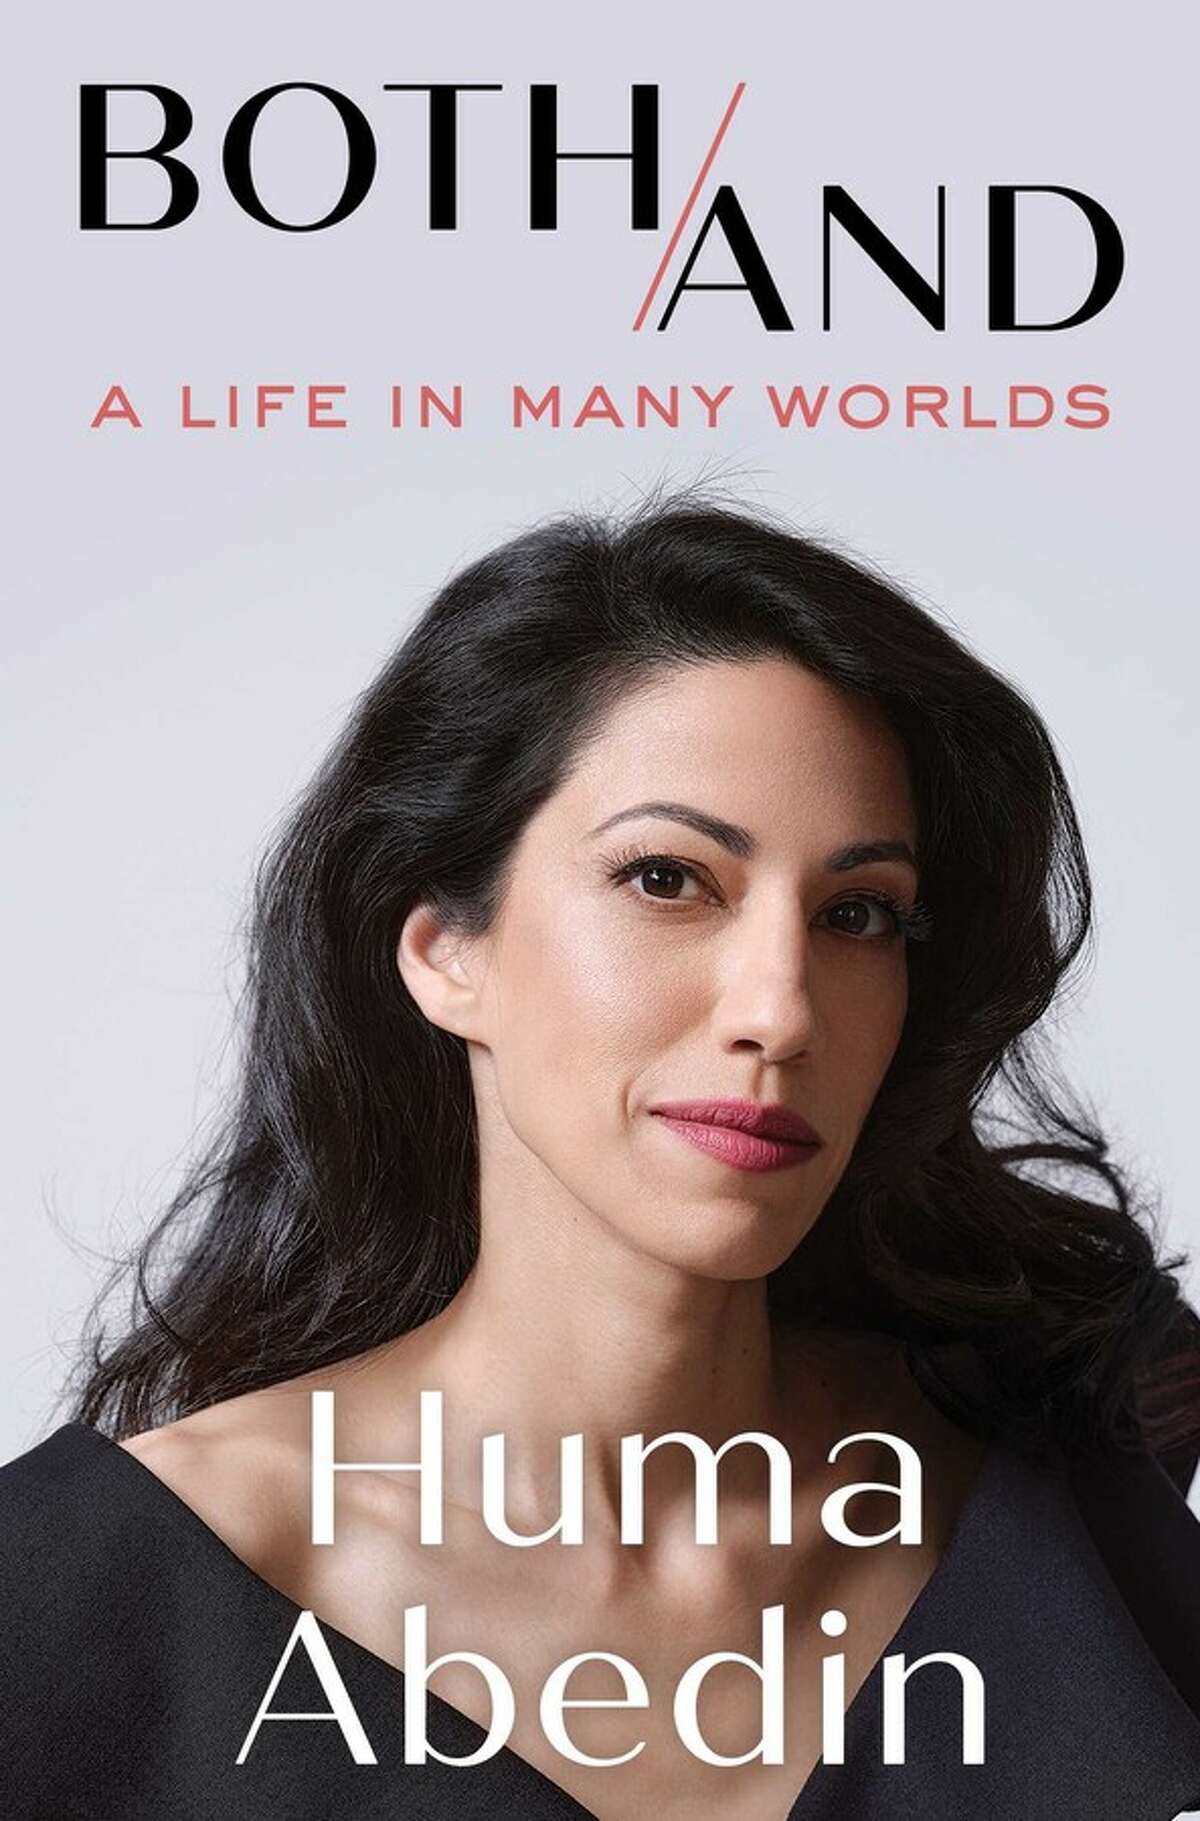 "Both/And: A Life in Many Worlds" by Huma Abedin.